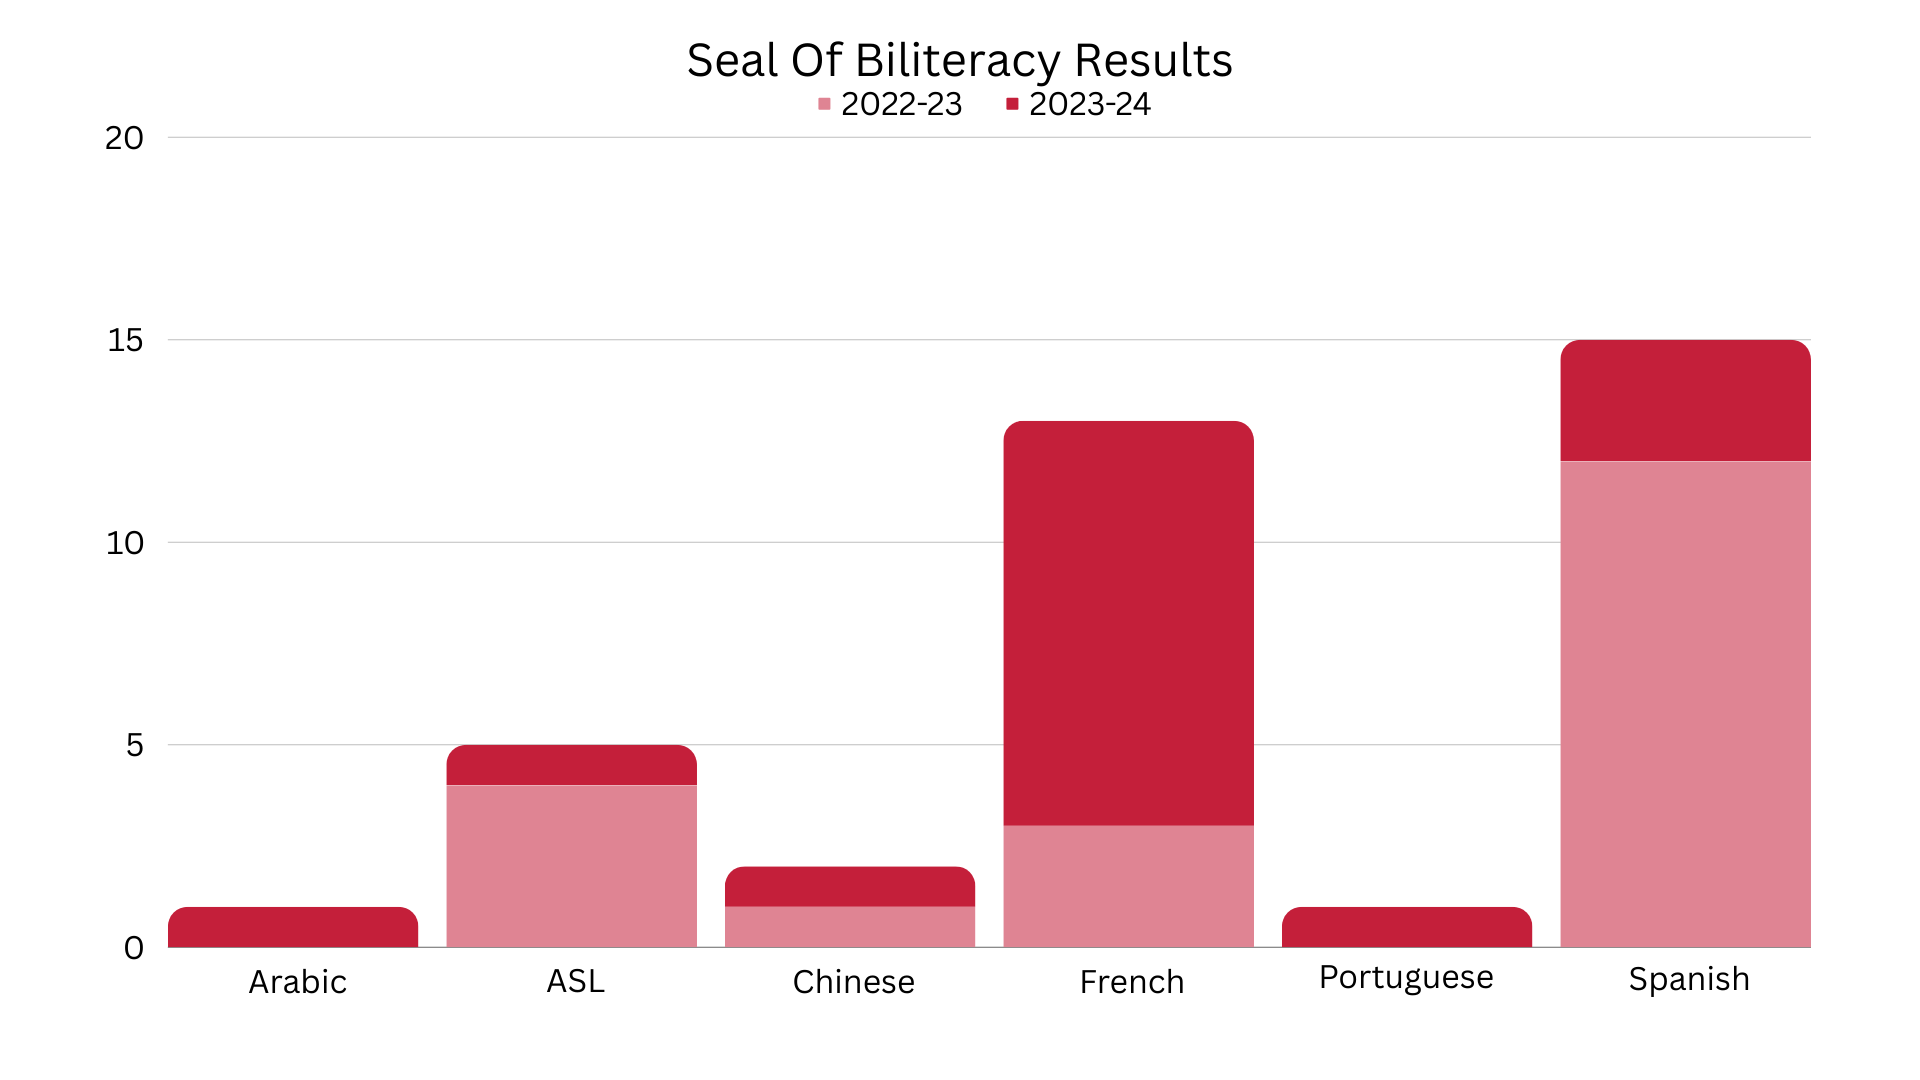 Seal of Biliteracy Results 2022-2024